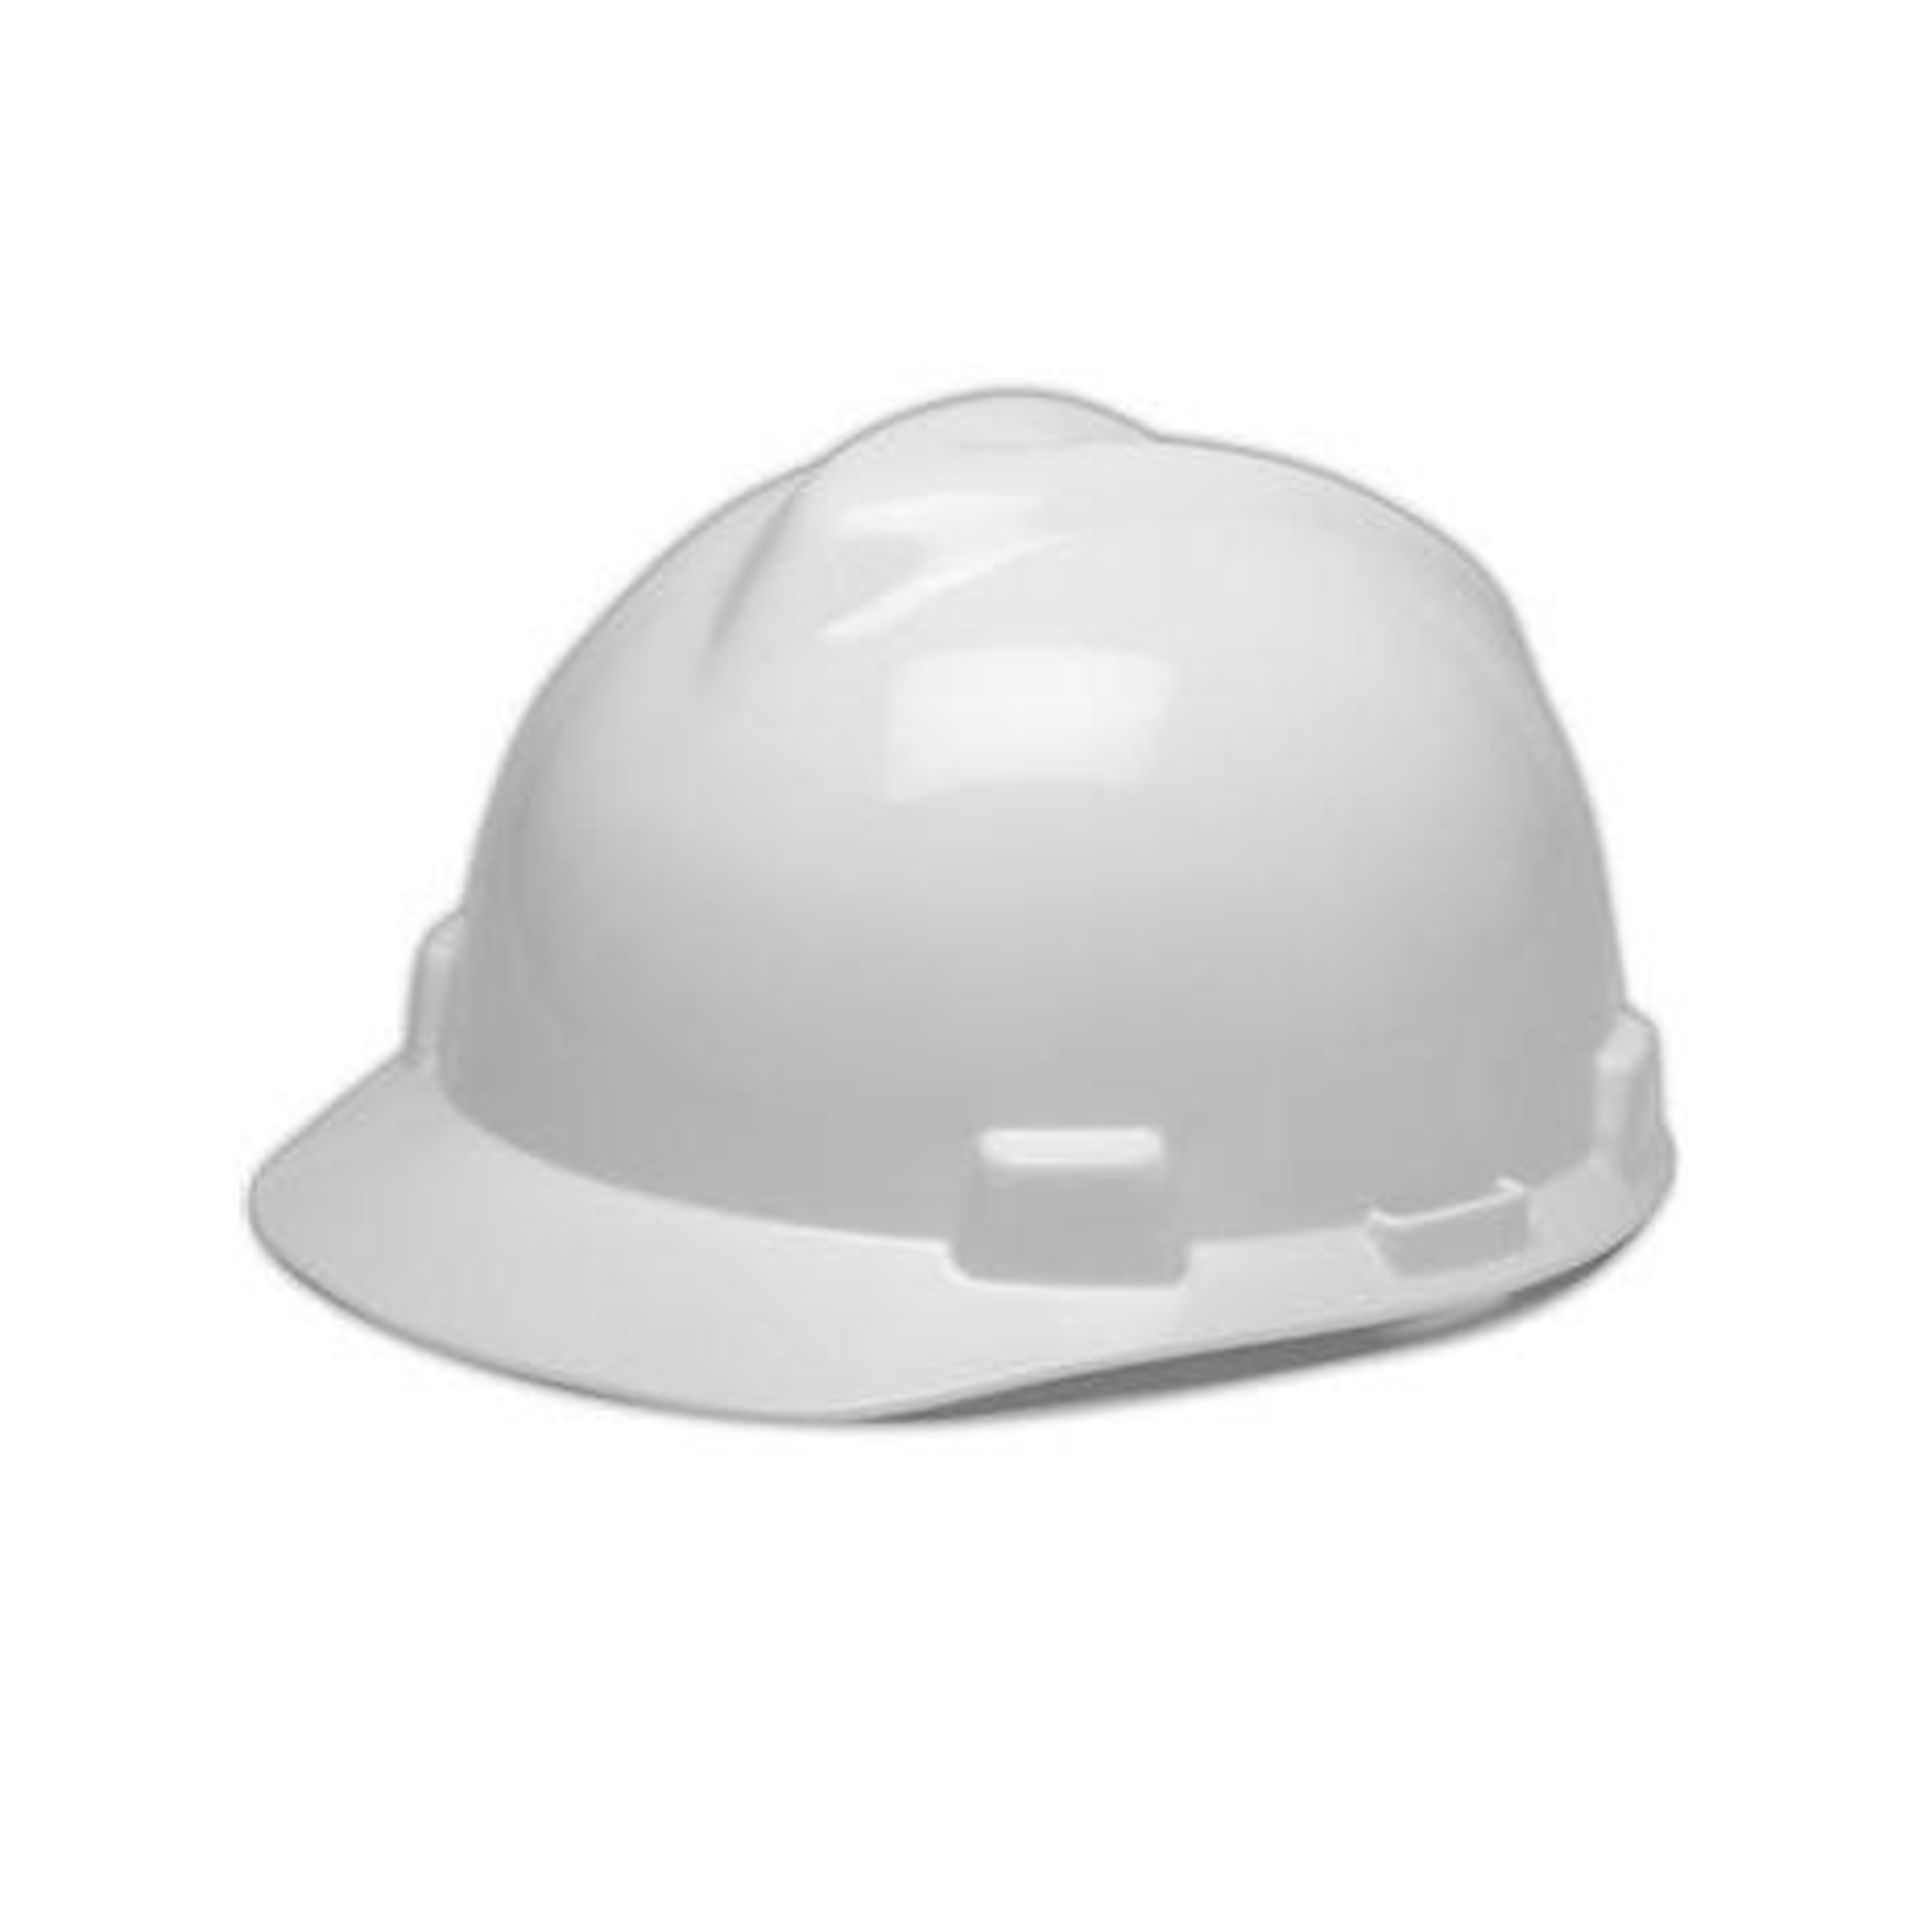 8 x White MSA V-Gard Slotted Protective Hard Hat with Fas-Trac Suspension - CL185 - Ref: C4 - New